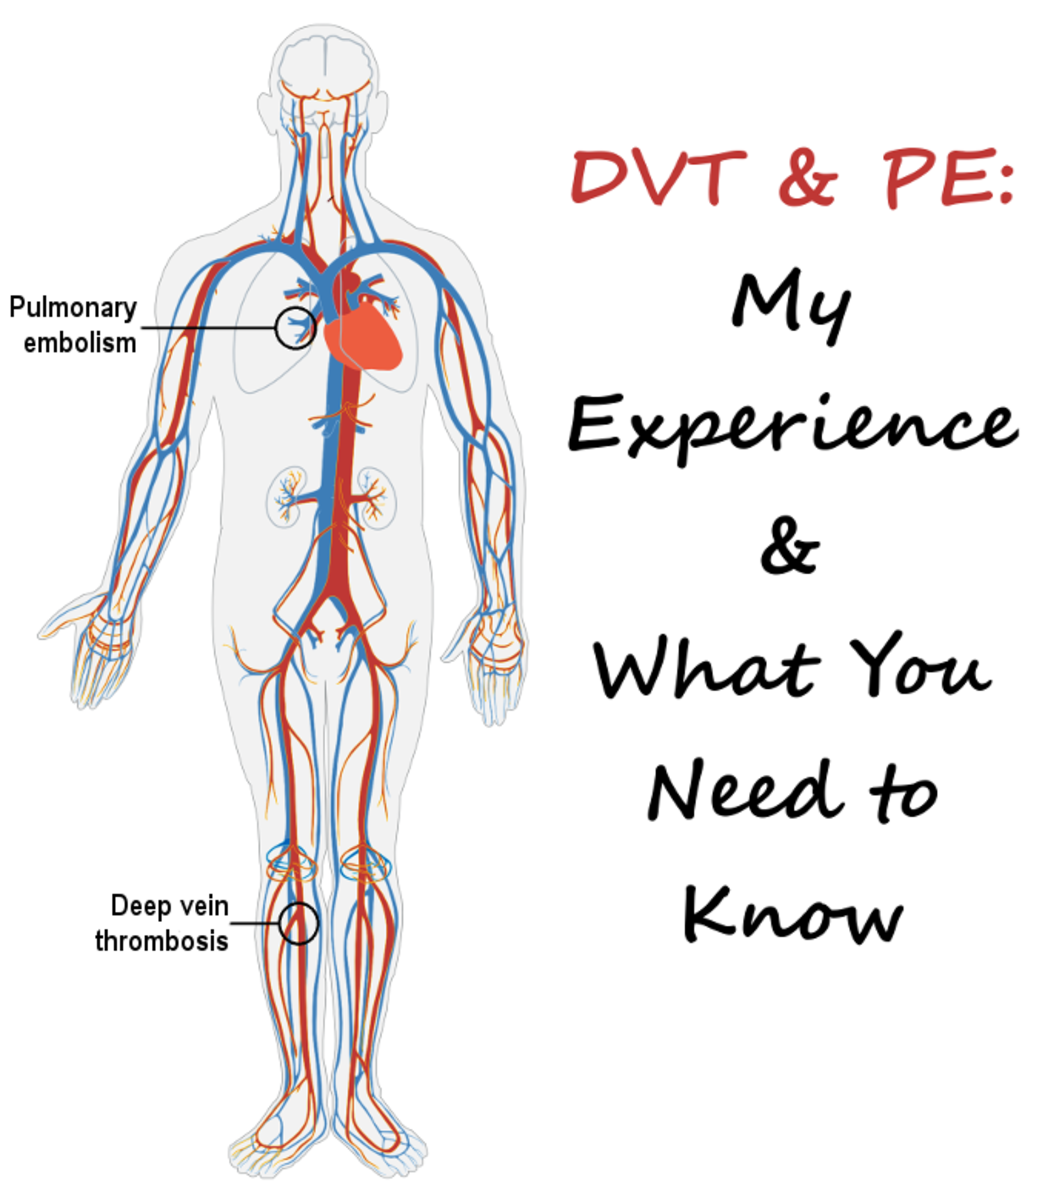 If you're experiencing mysterious or unexplained aches and pains in your leg or foot, get your doctor to examine you for DVT.